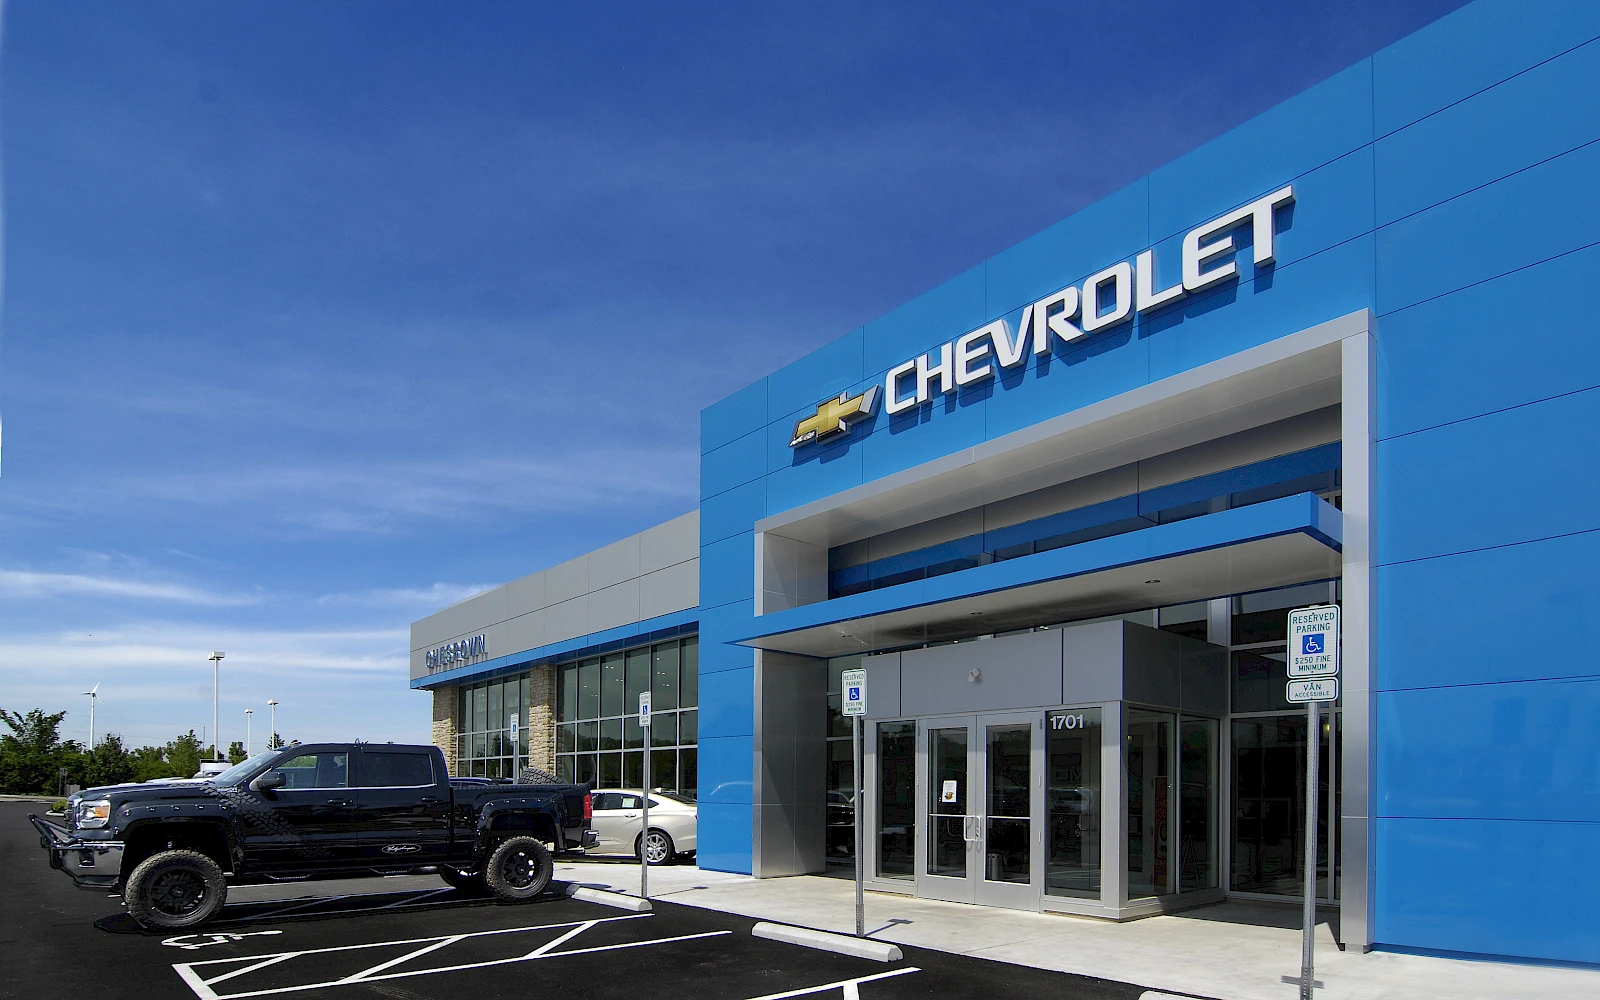 Chesrown Chevrolet Buick GMC auto dealership construction finished picture 20